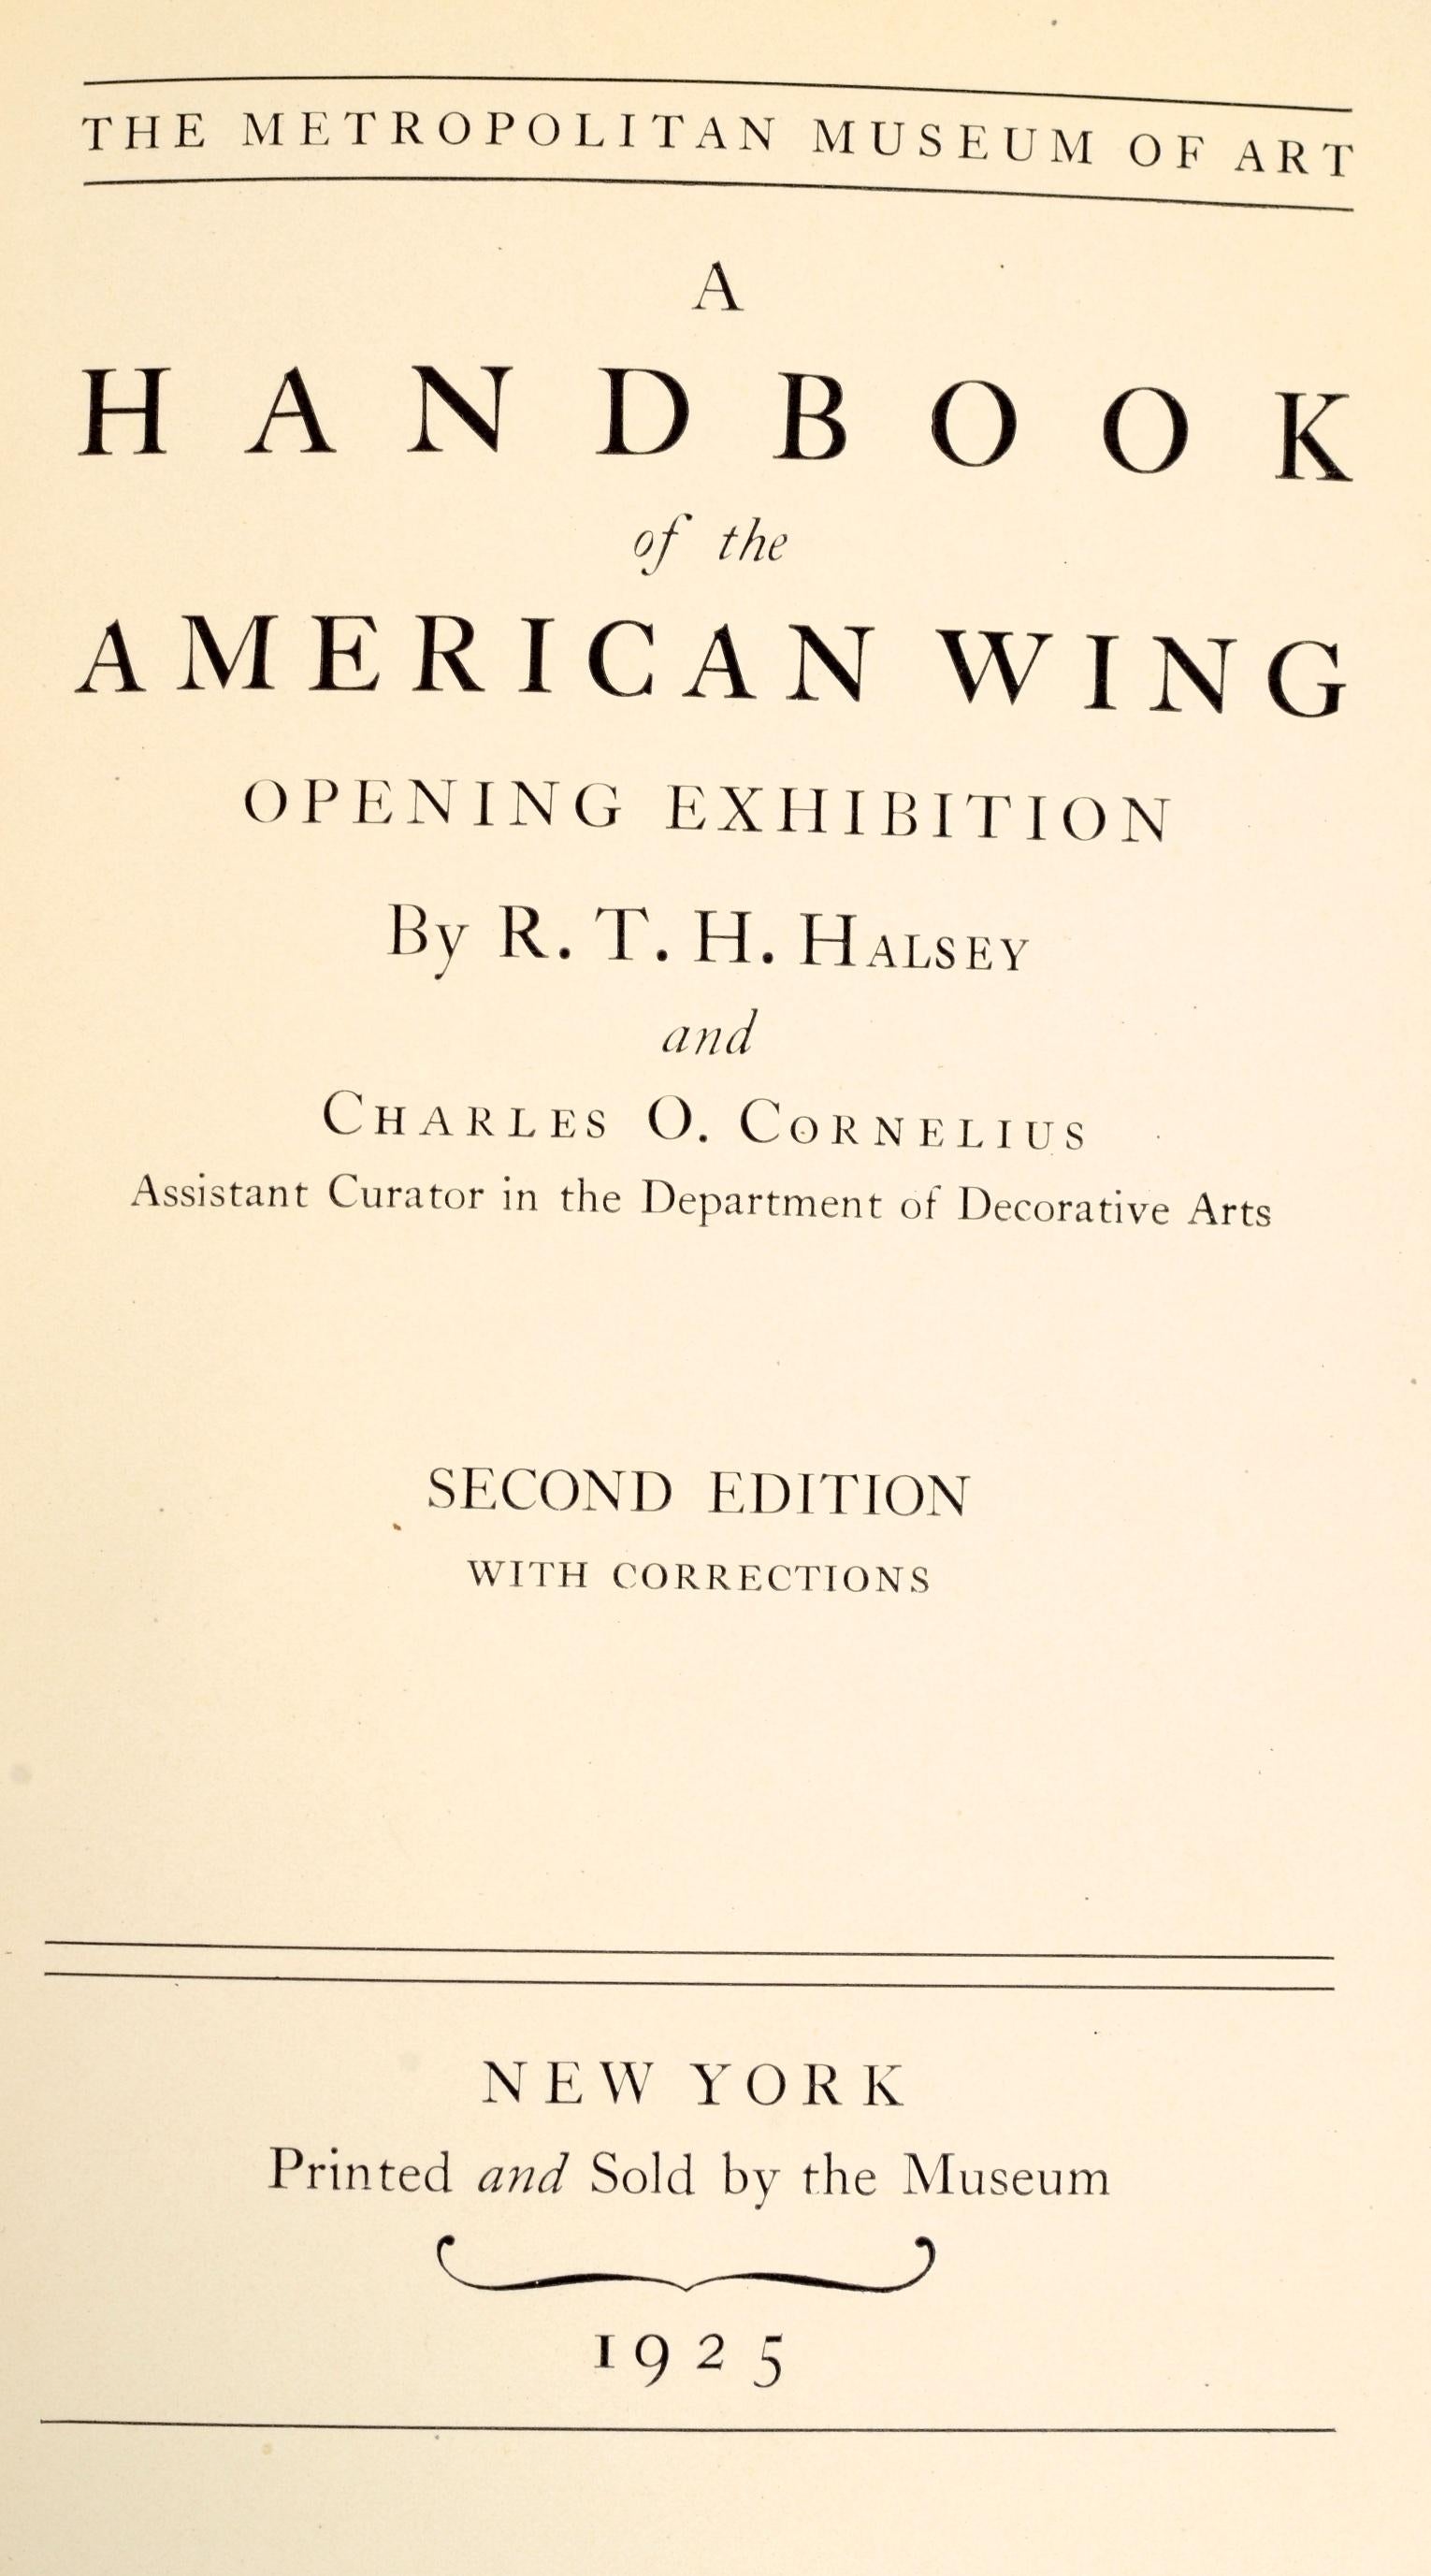 A Handbook of the American Wing: Opening Exhibition by R.T.H. Halsey, and Charles O. Cornelius (Assistant Curator in the Department of Decorative Arts.) New York: Metropolitan Museum of Art Nov. 1924. Rare 2nd Ed leather bound presentation catalog